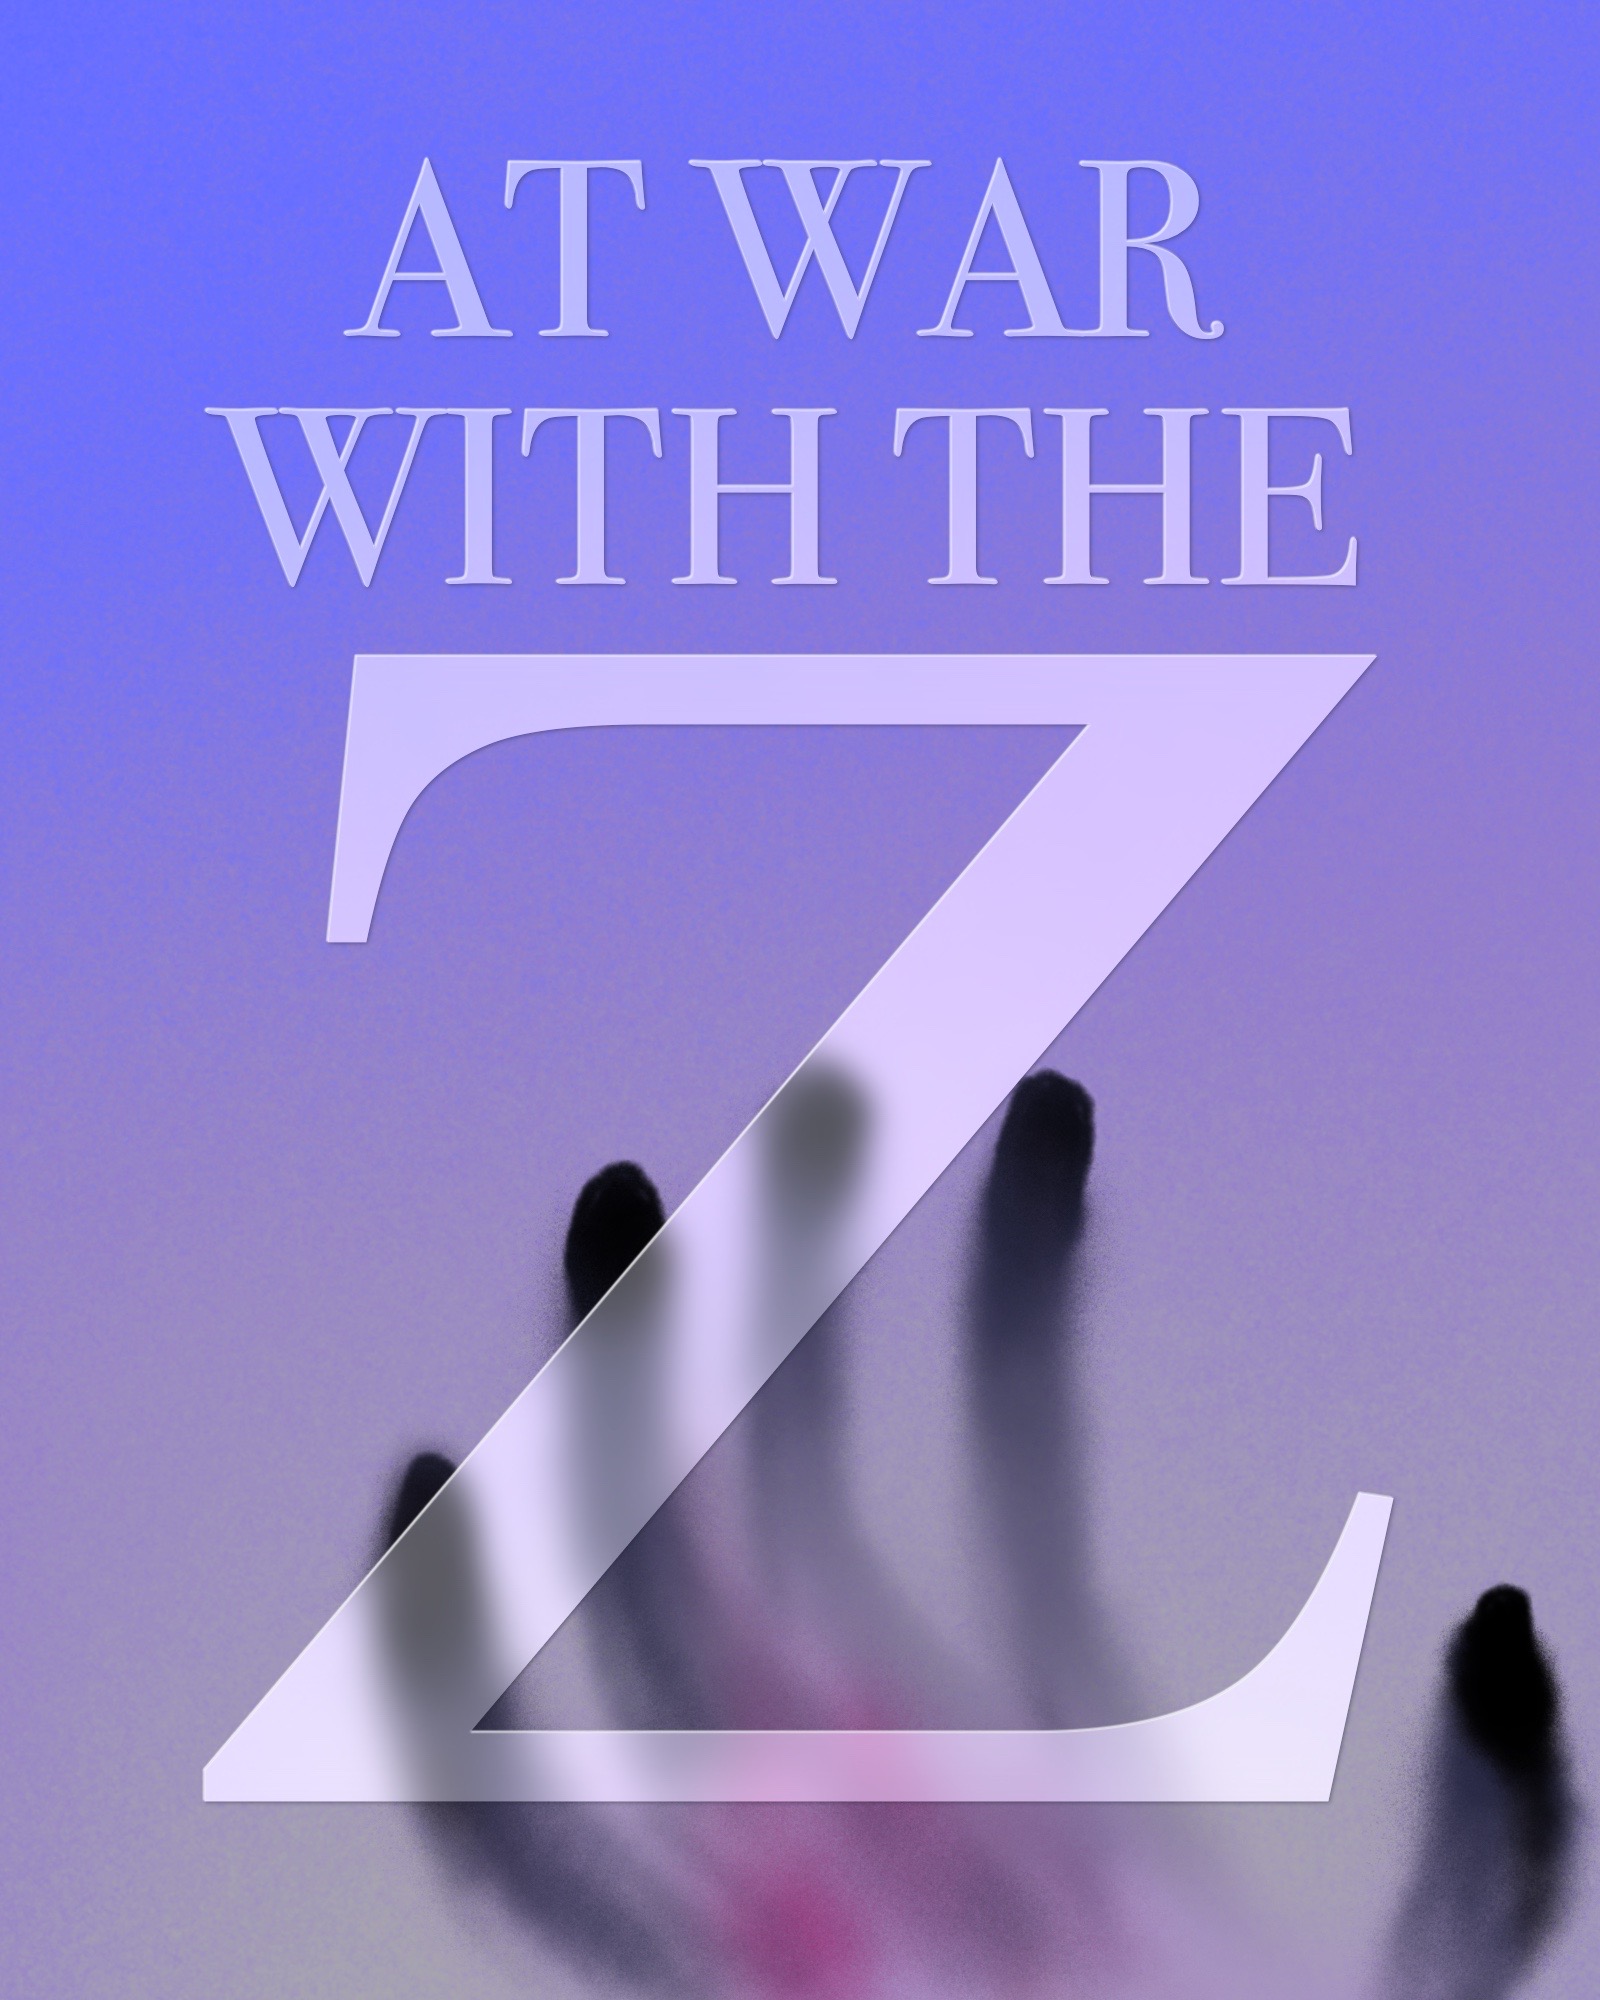 World War Z an analysis of neoliberal propaganda, "At War with the Z" by Aaron Trujillo